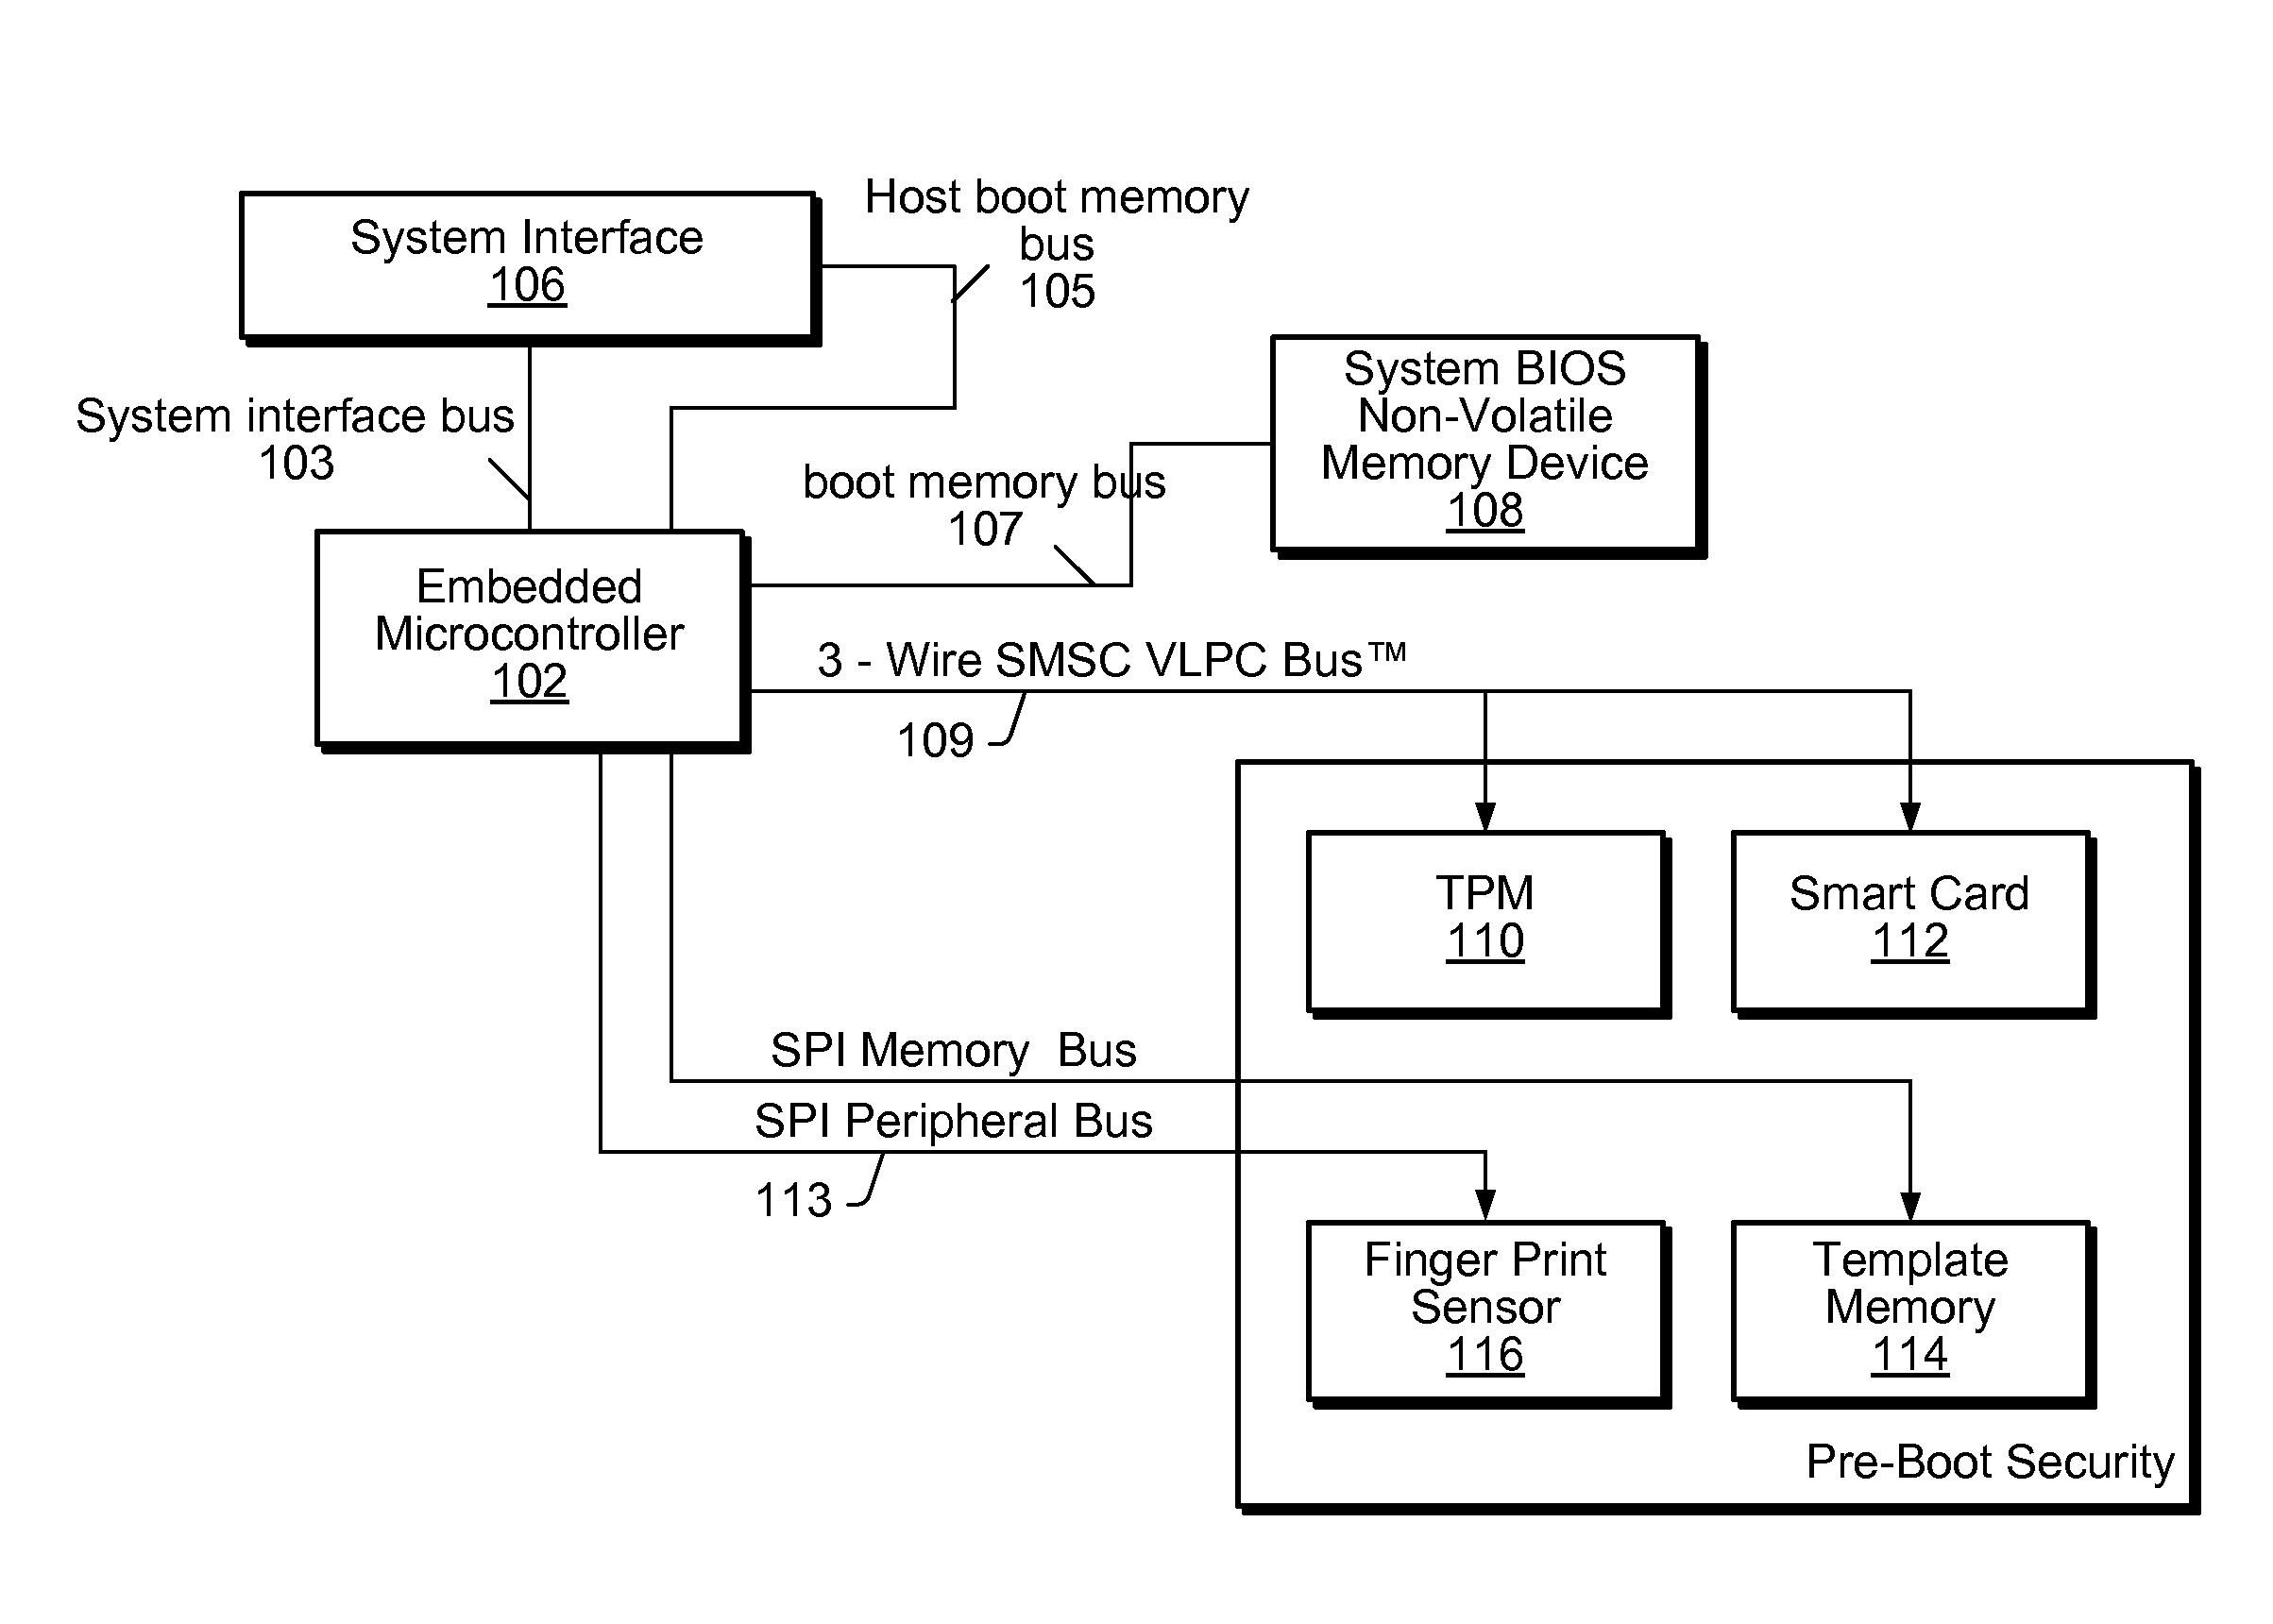 Enhancing security of a system via access by an embedded controller to a secure storage device